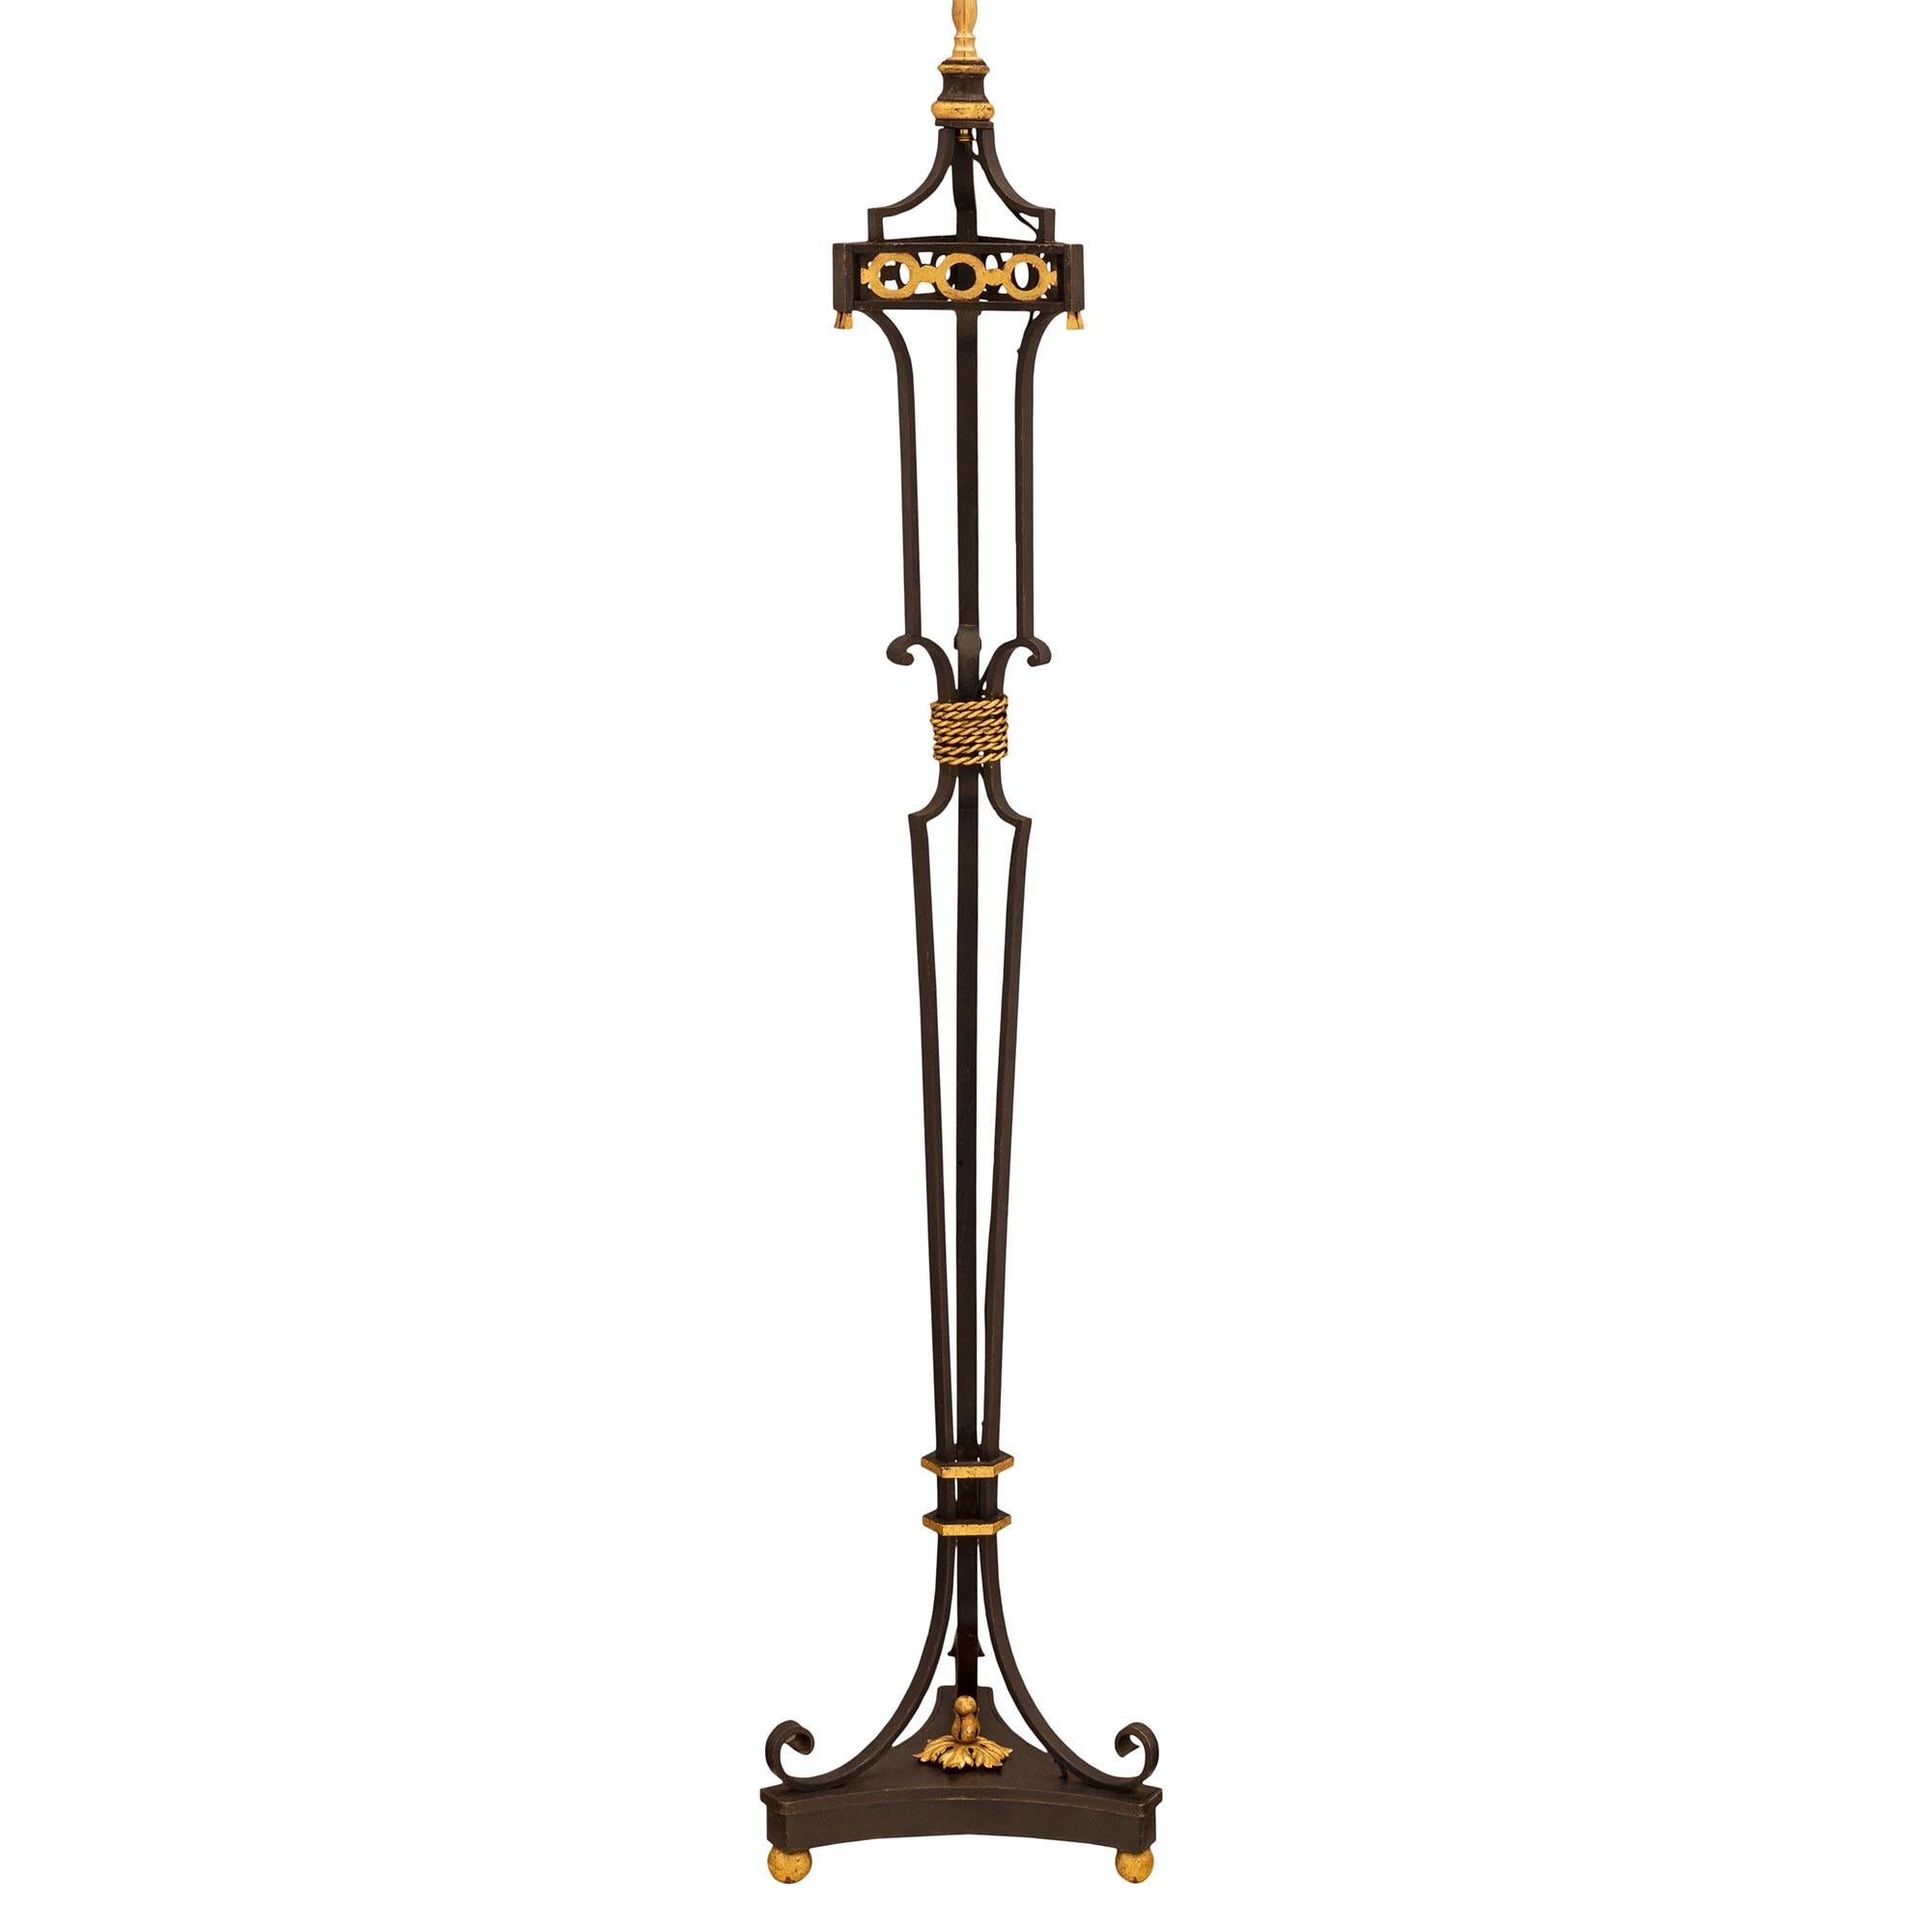 French 19th Century Wrought Iron and Gilt Metal Floor Lamp In Good Condition For Sale In West Palm Beach, FL